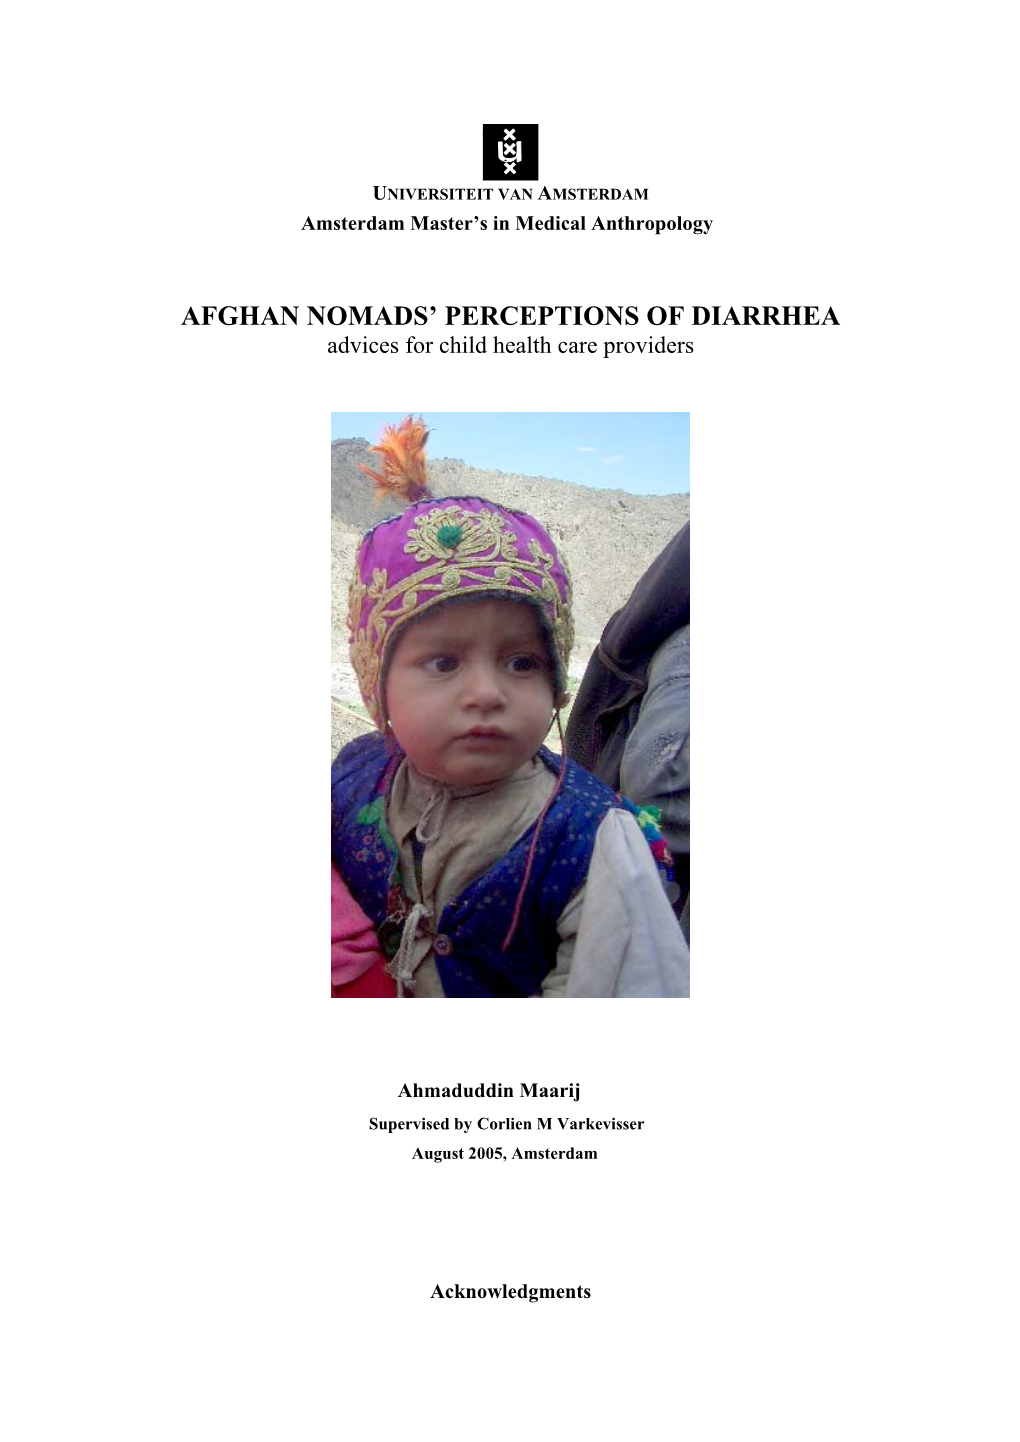 Afghan Nomads' Perceptions of Diarrhea